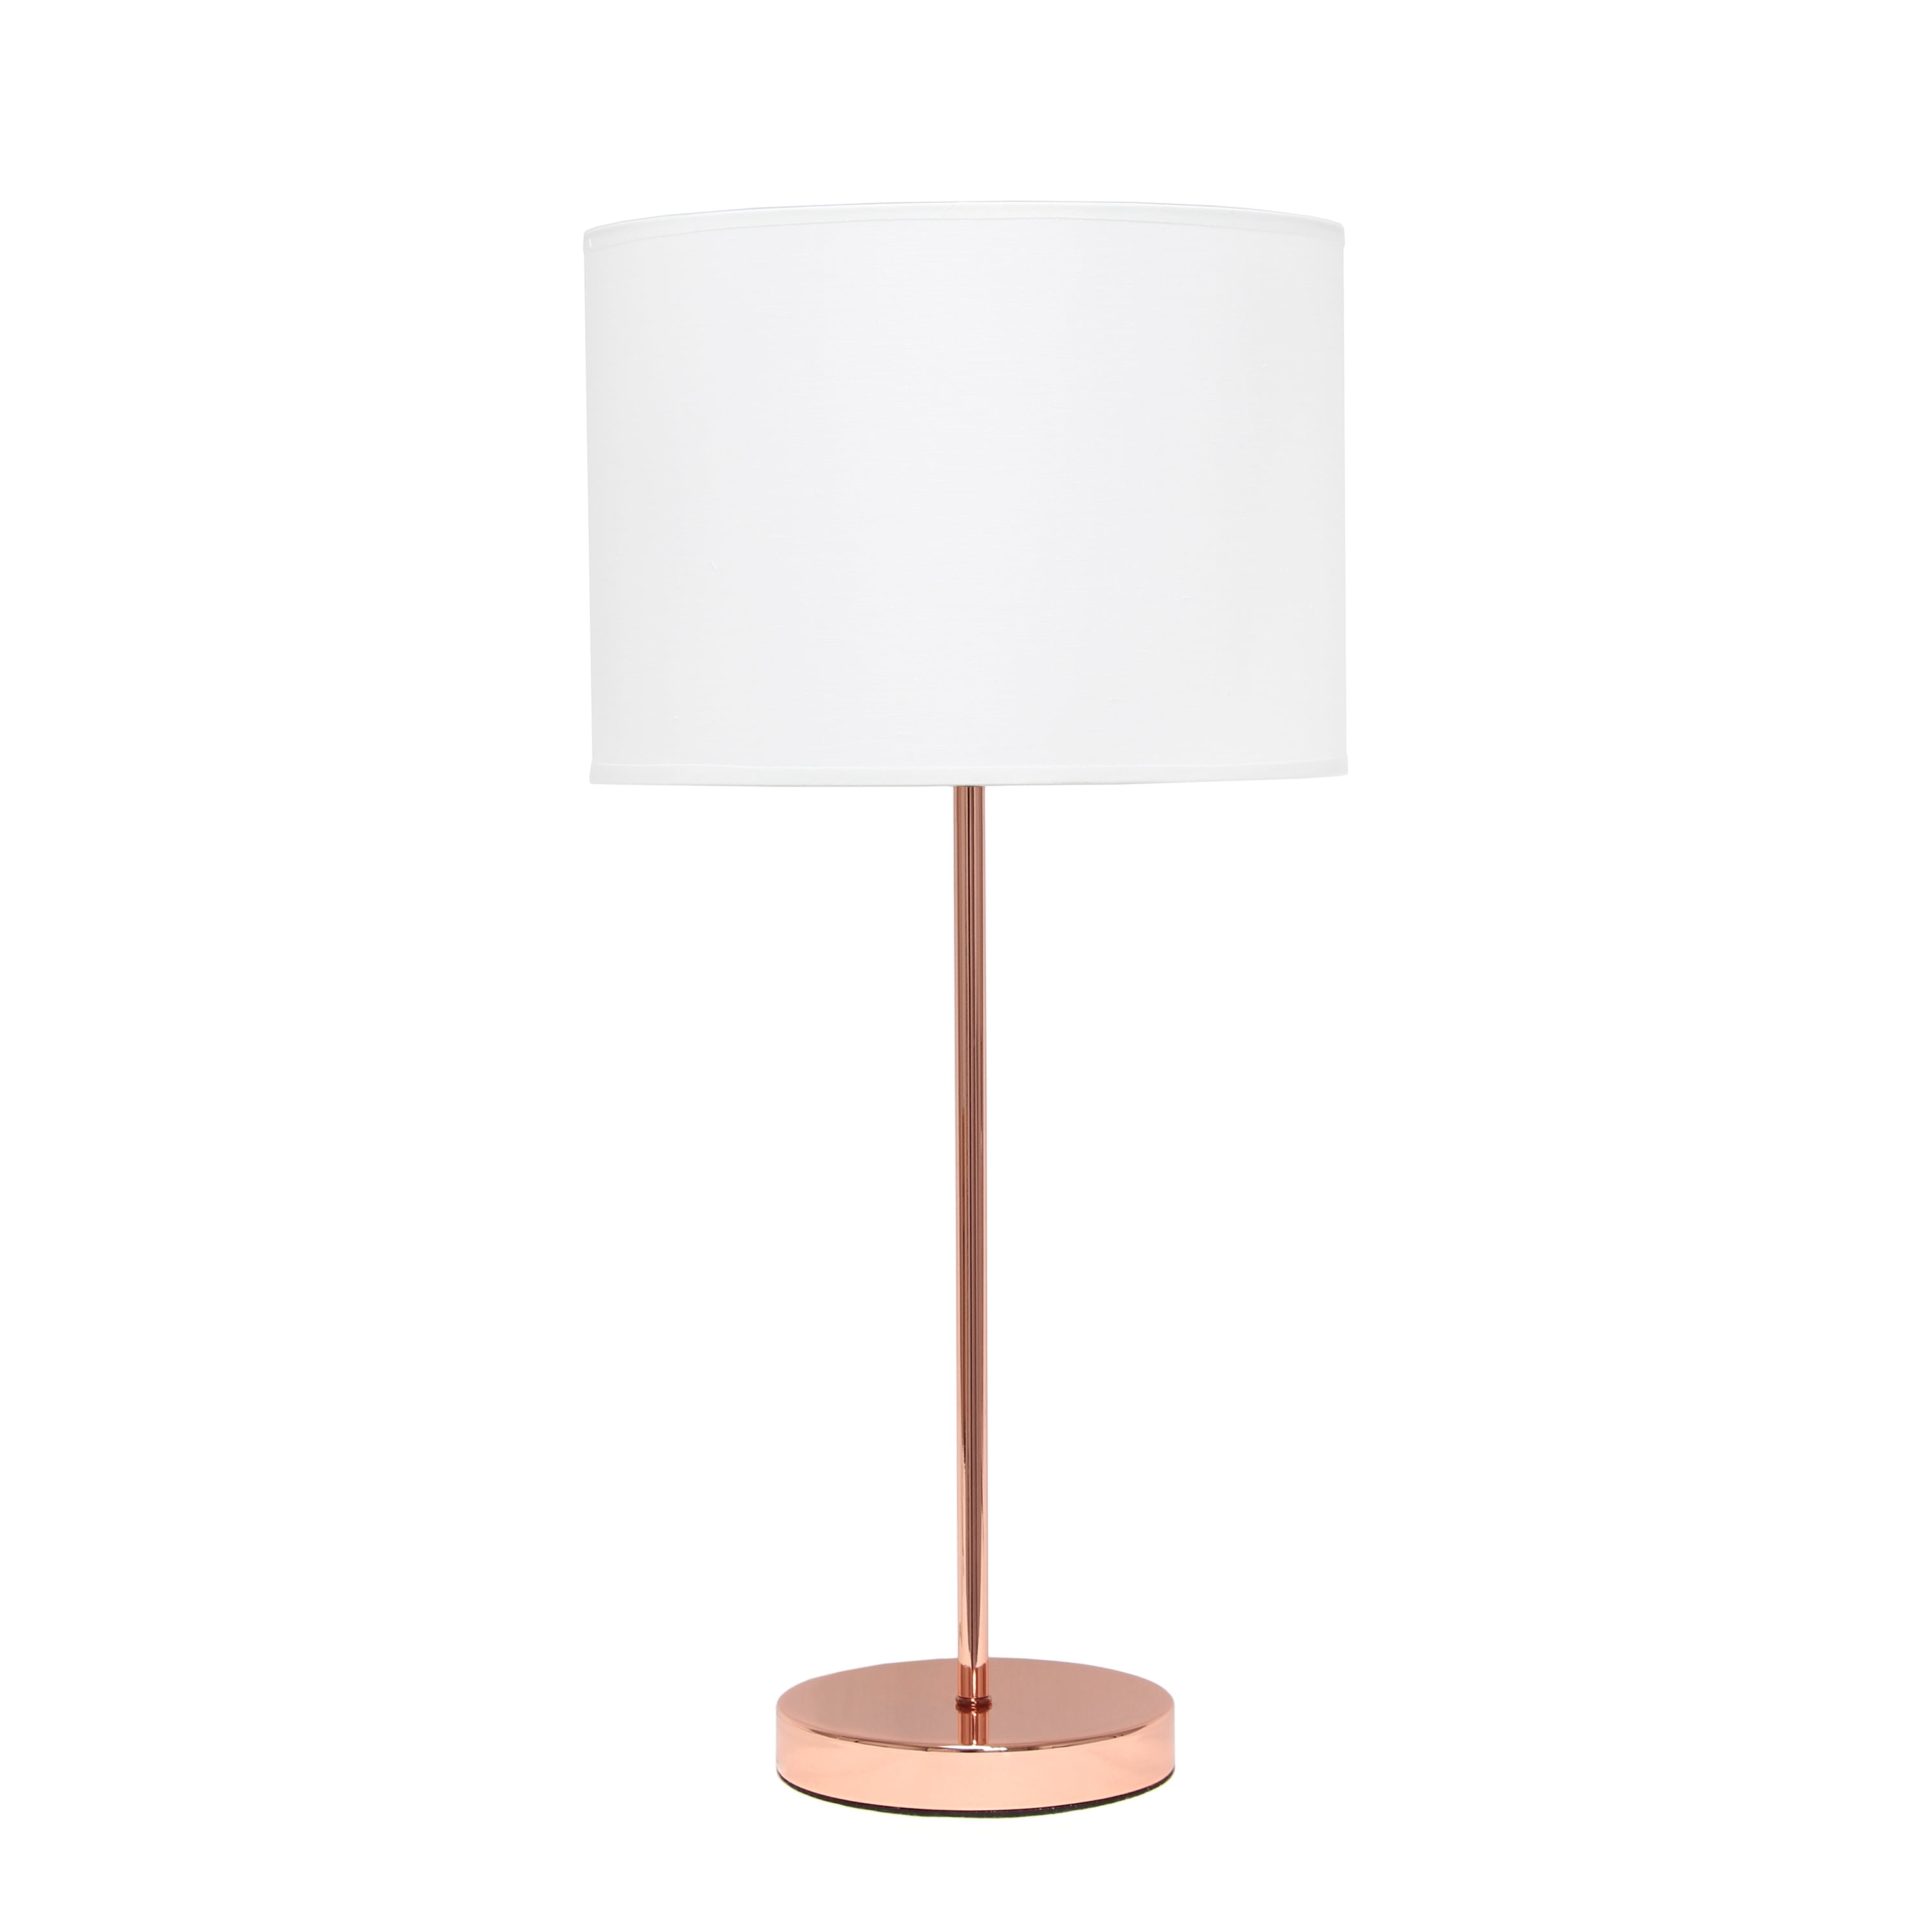 Lt2040-rgd Rose Gold Stick Table Lamp With Fabric Shade, White